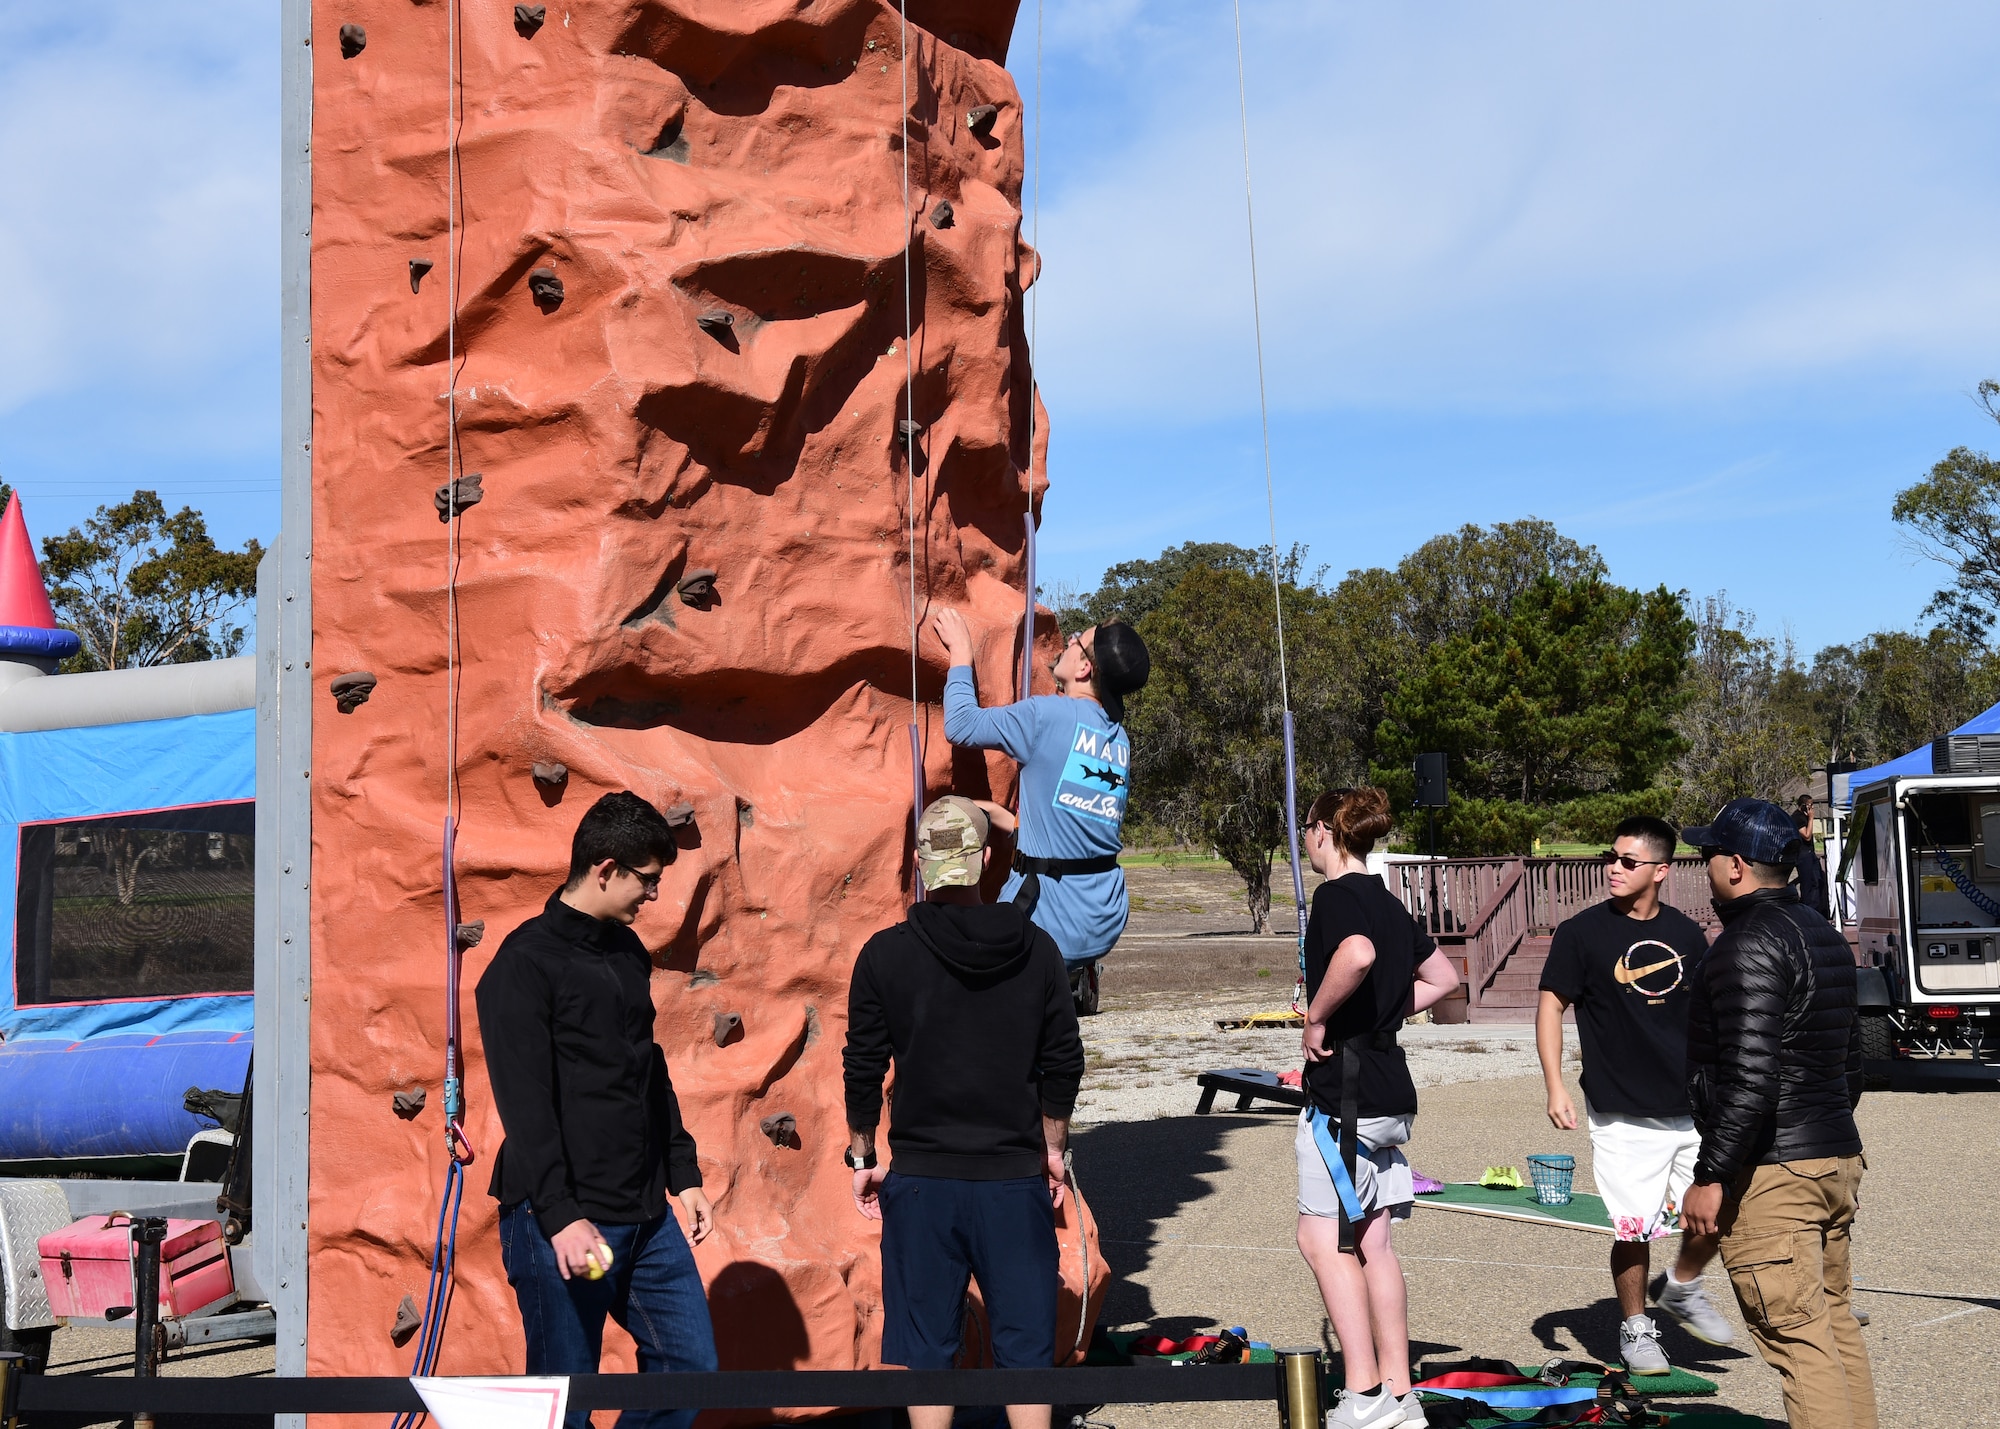 Base personnel rock climb during Vandenberg’s Ninth Annual Exotic Car Show Oct. 23, 2021, at Vandenberg Space Force Base, Calif. The 30th Force Support Squadron coordinates with different business to provide family- friendly activities. (U.S. Space Force photo by Airman First Class Tiarra Sibley)